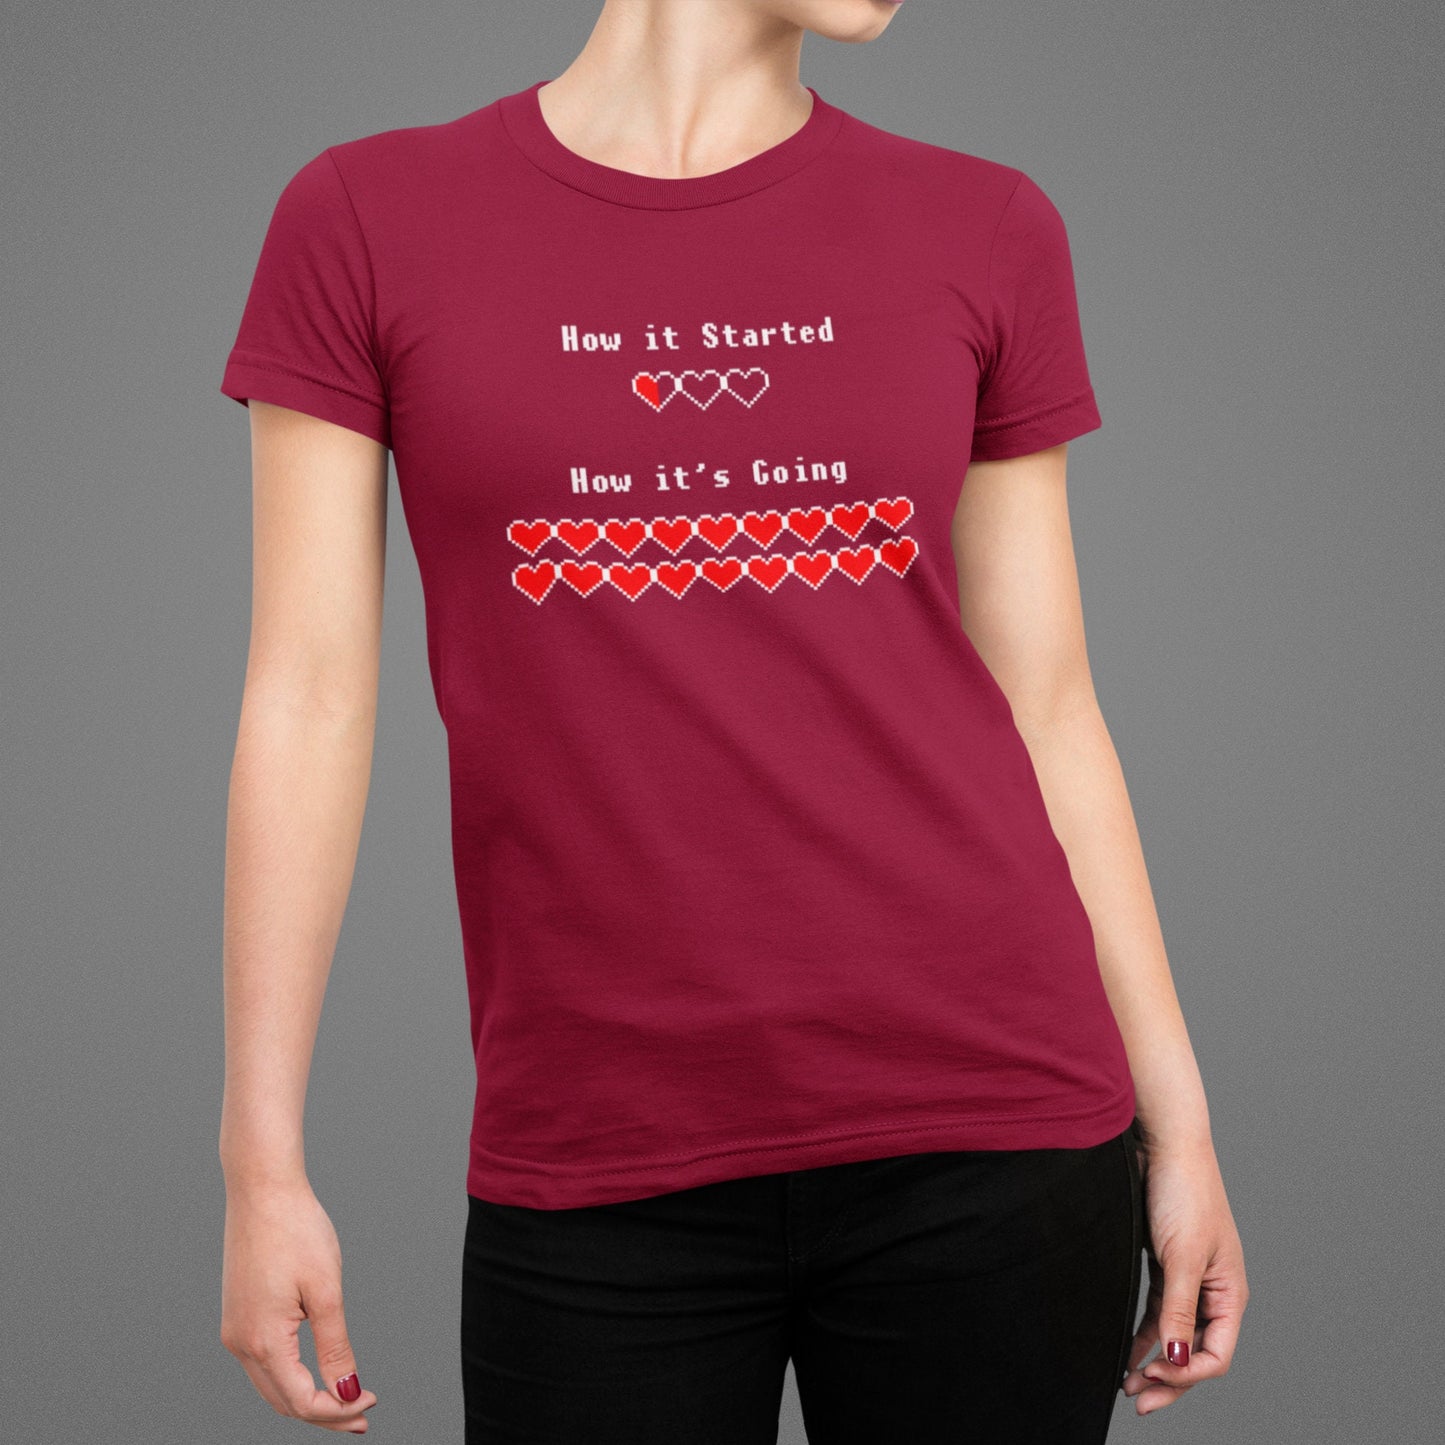 How It Started How It's Going Shirt-Women's Tee-Various Colors-Gamer Shirt-Game Fan Art-Video Game T-Shirt-Meme Art-T-Shirt Meme-Pixel Art